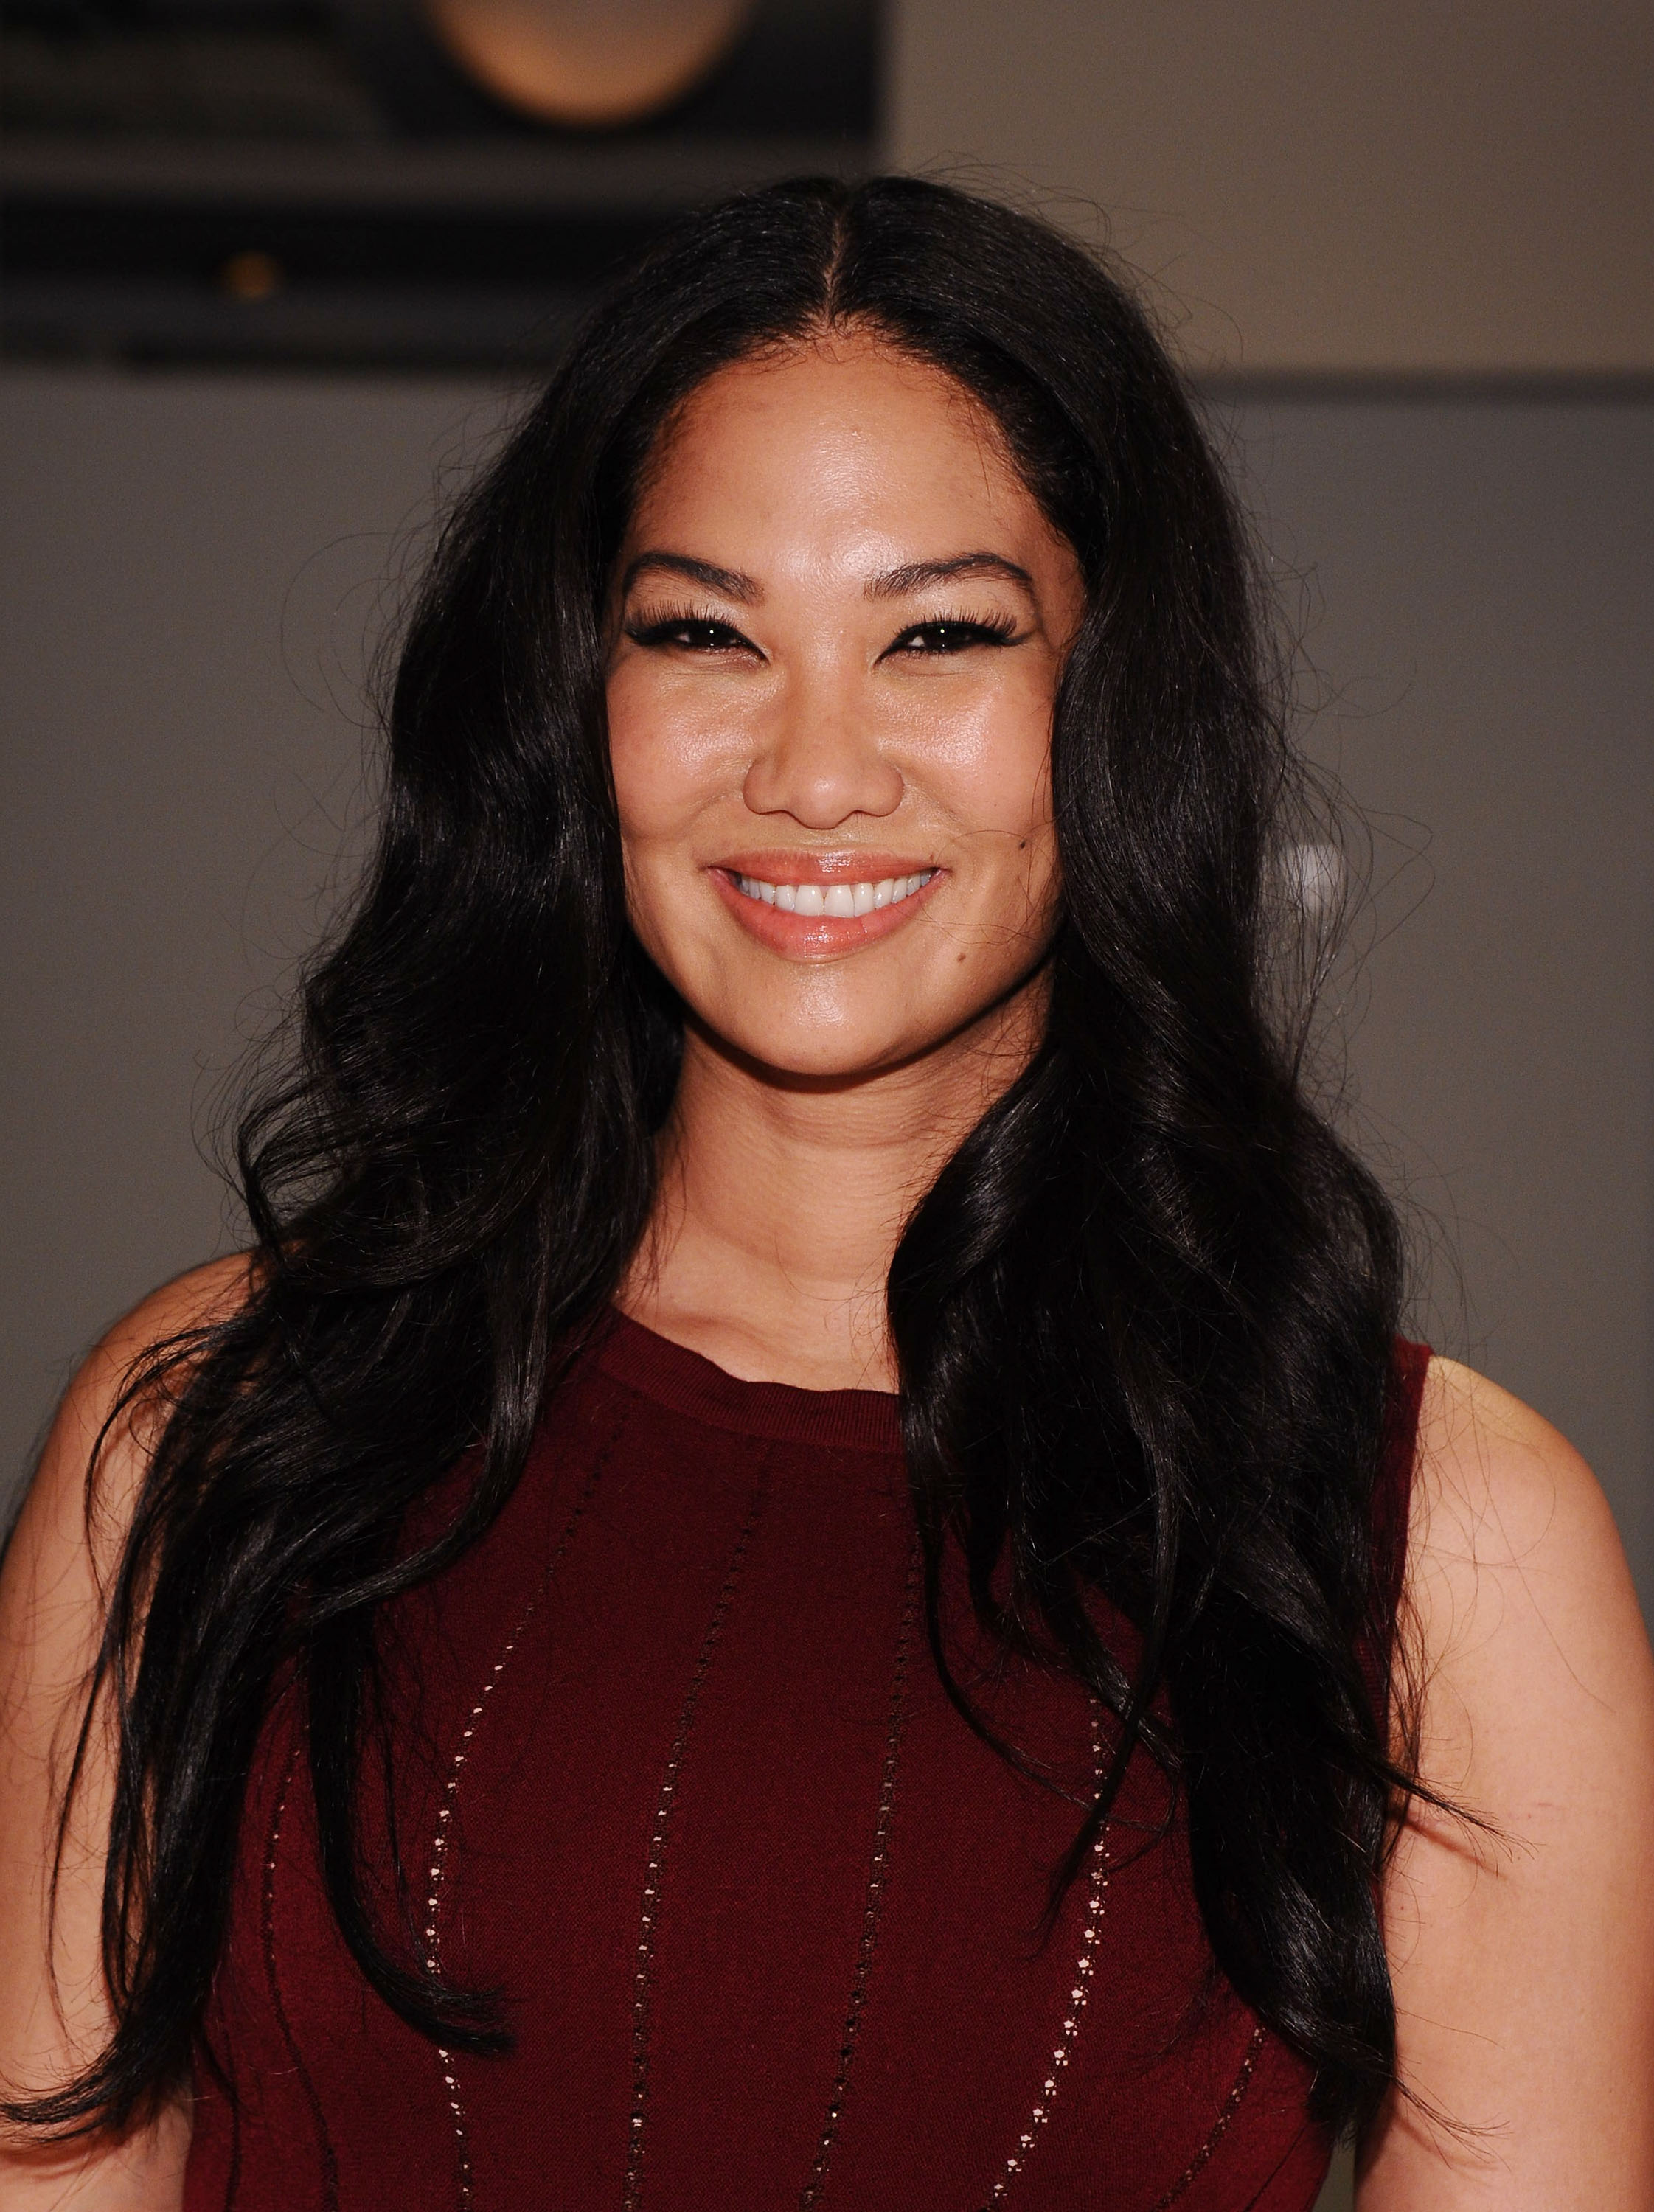 Kimora Lee Simmons poses during Mercedes-Benz Fashion Week Spring 2015 on September 5, 2014 in New York City. | Source: Getty Images